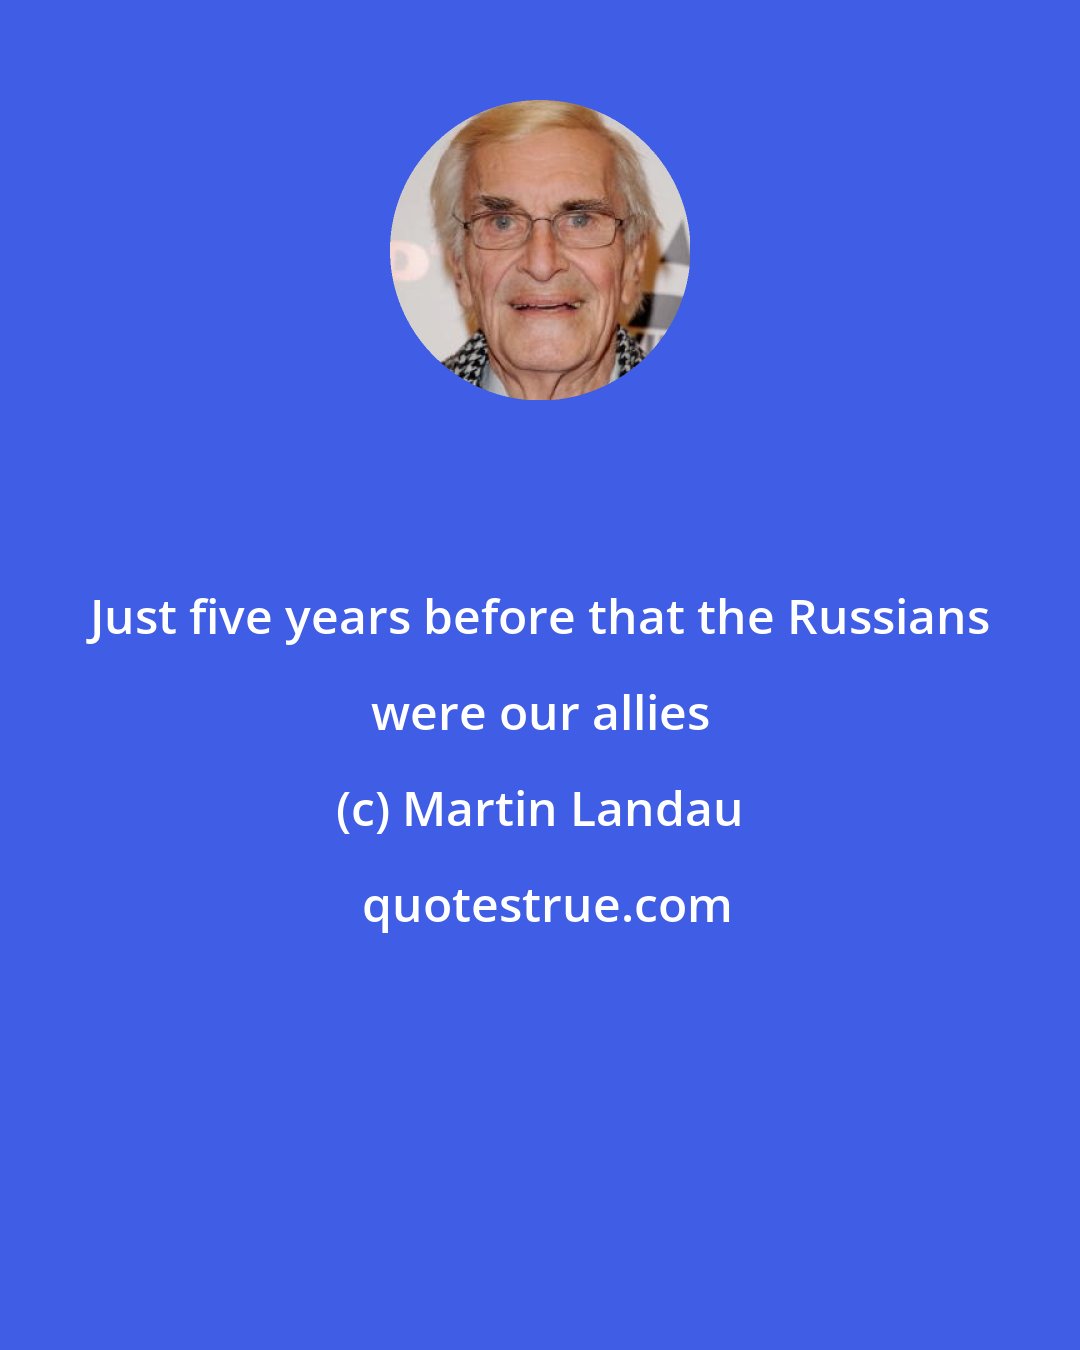 Martin Landau: Just five years before that the Russians were our allies